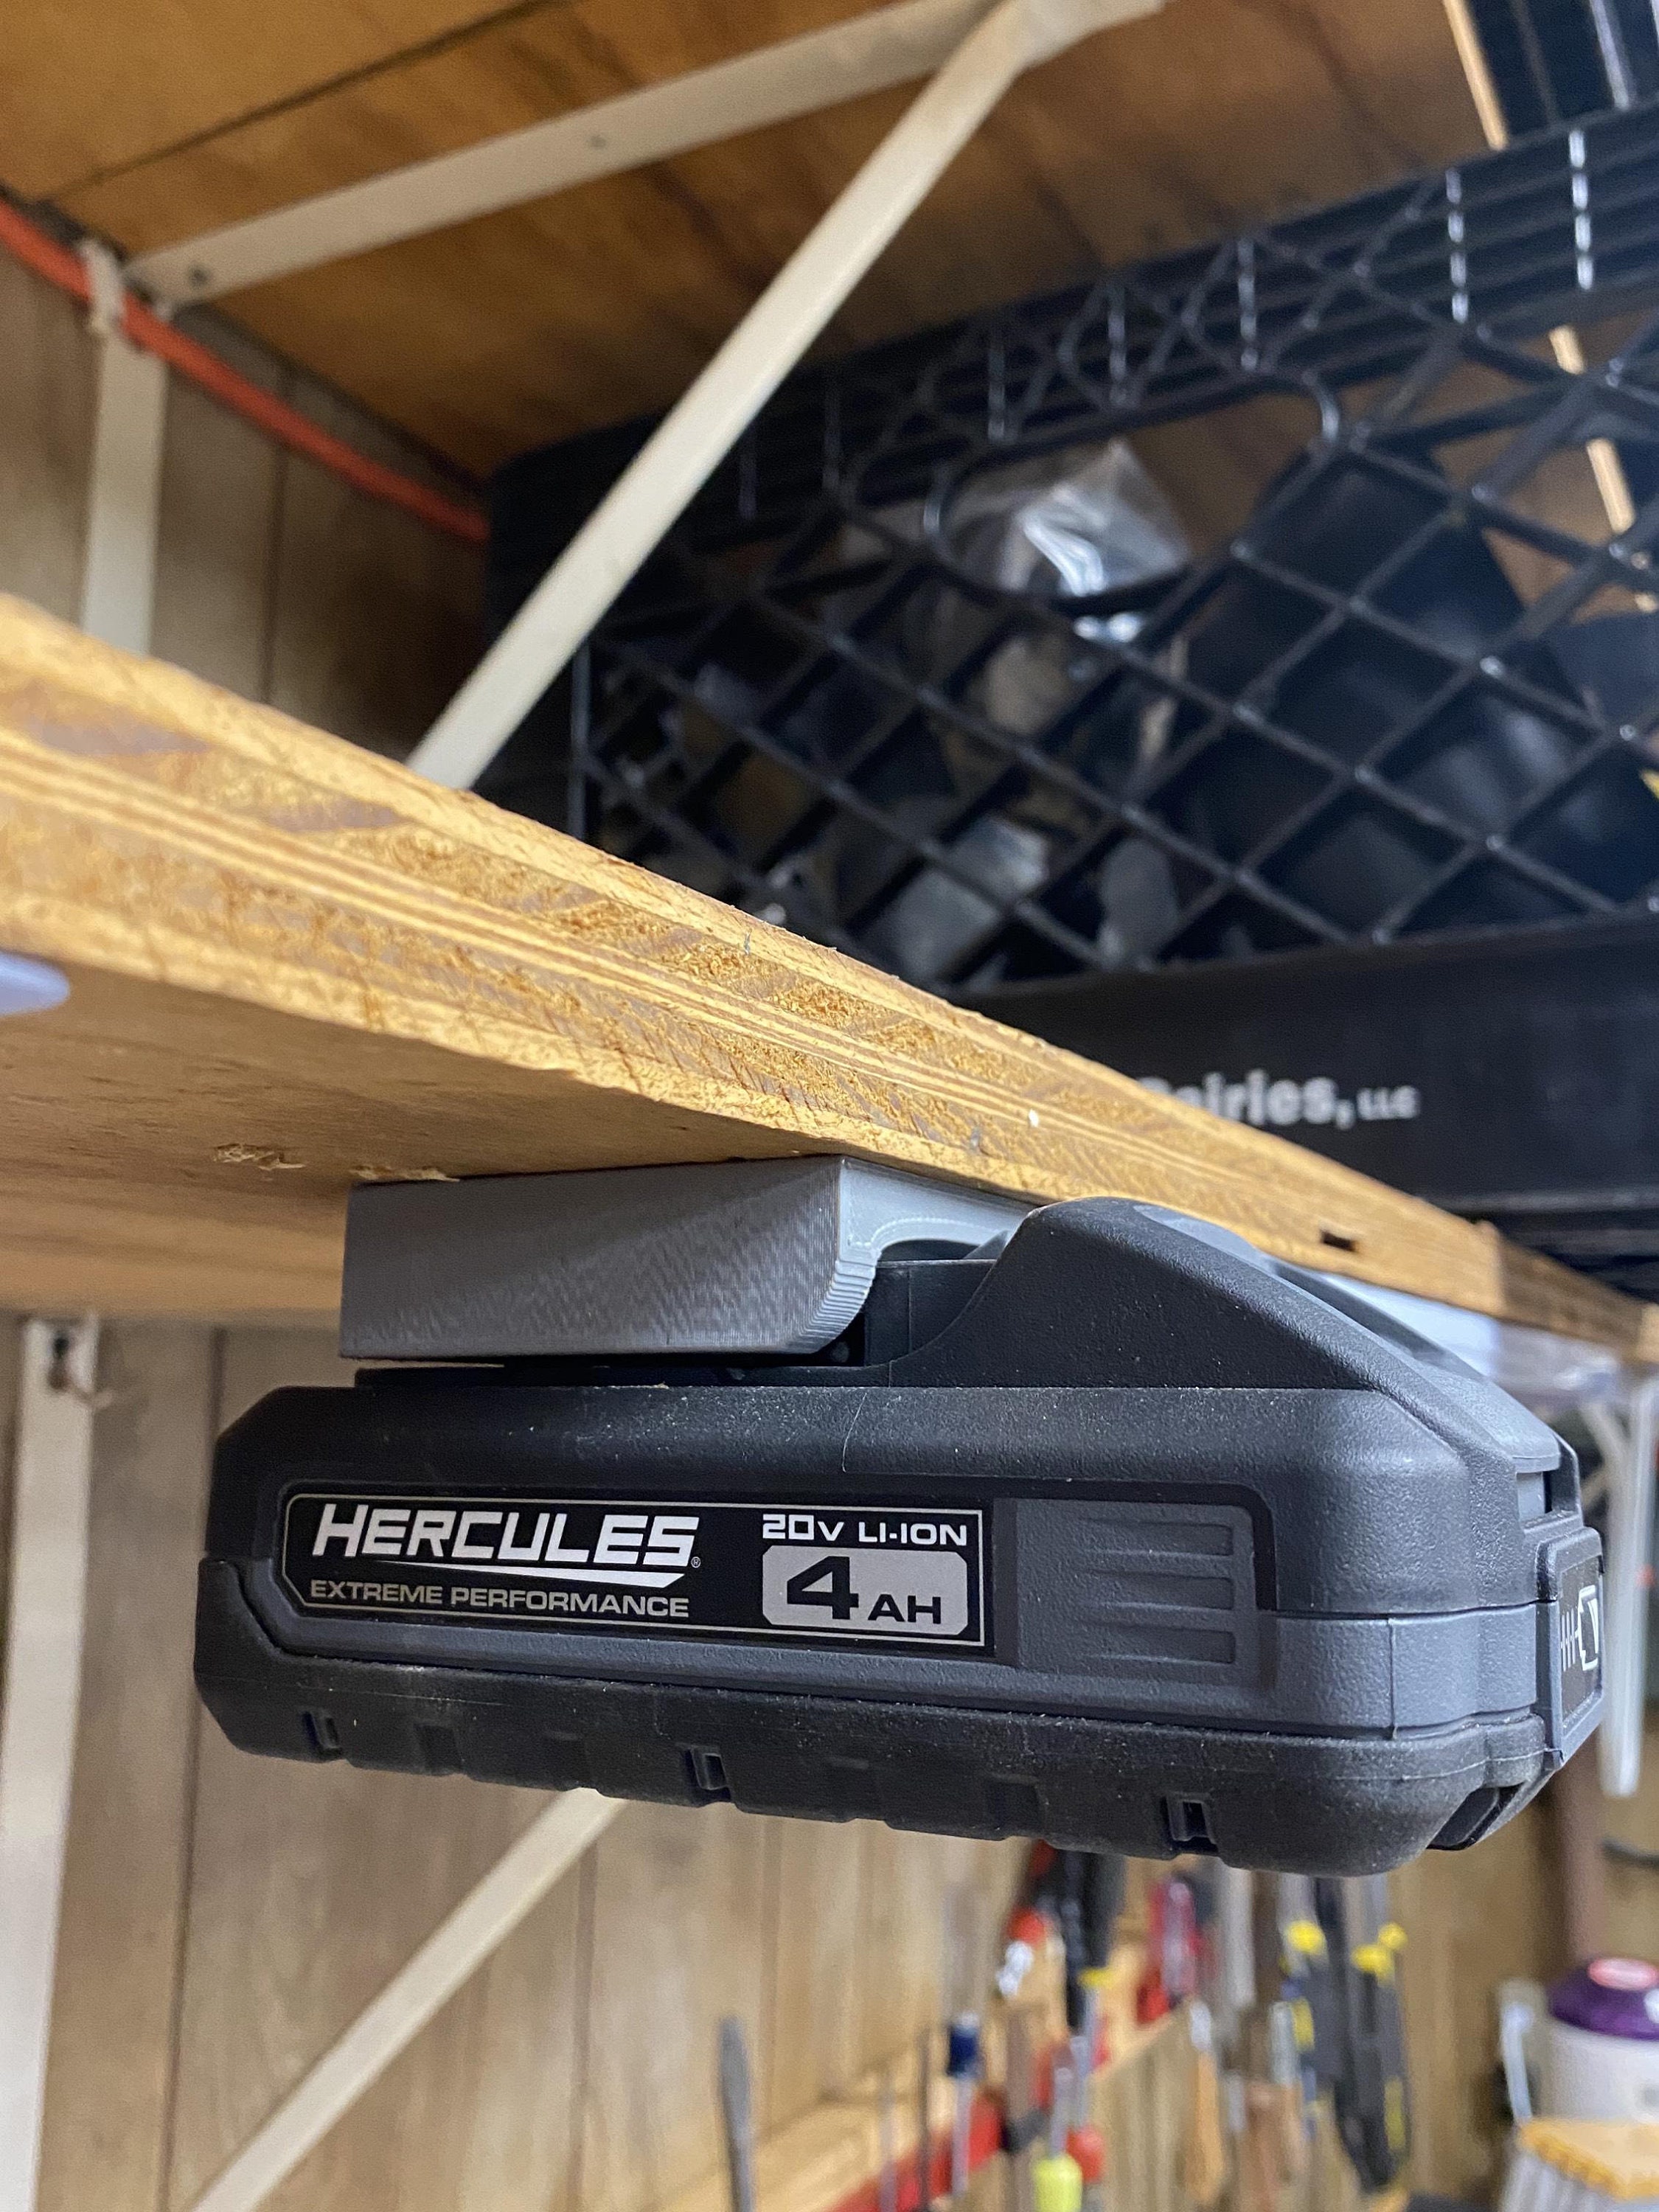 Hercules 20V 4 Ah Extreme Performance Lithium-Ion Compact Battery